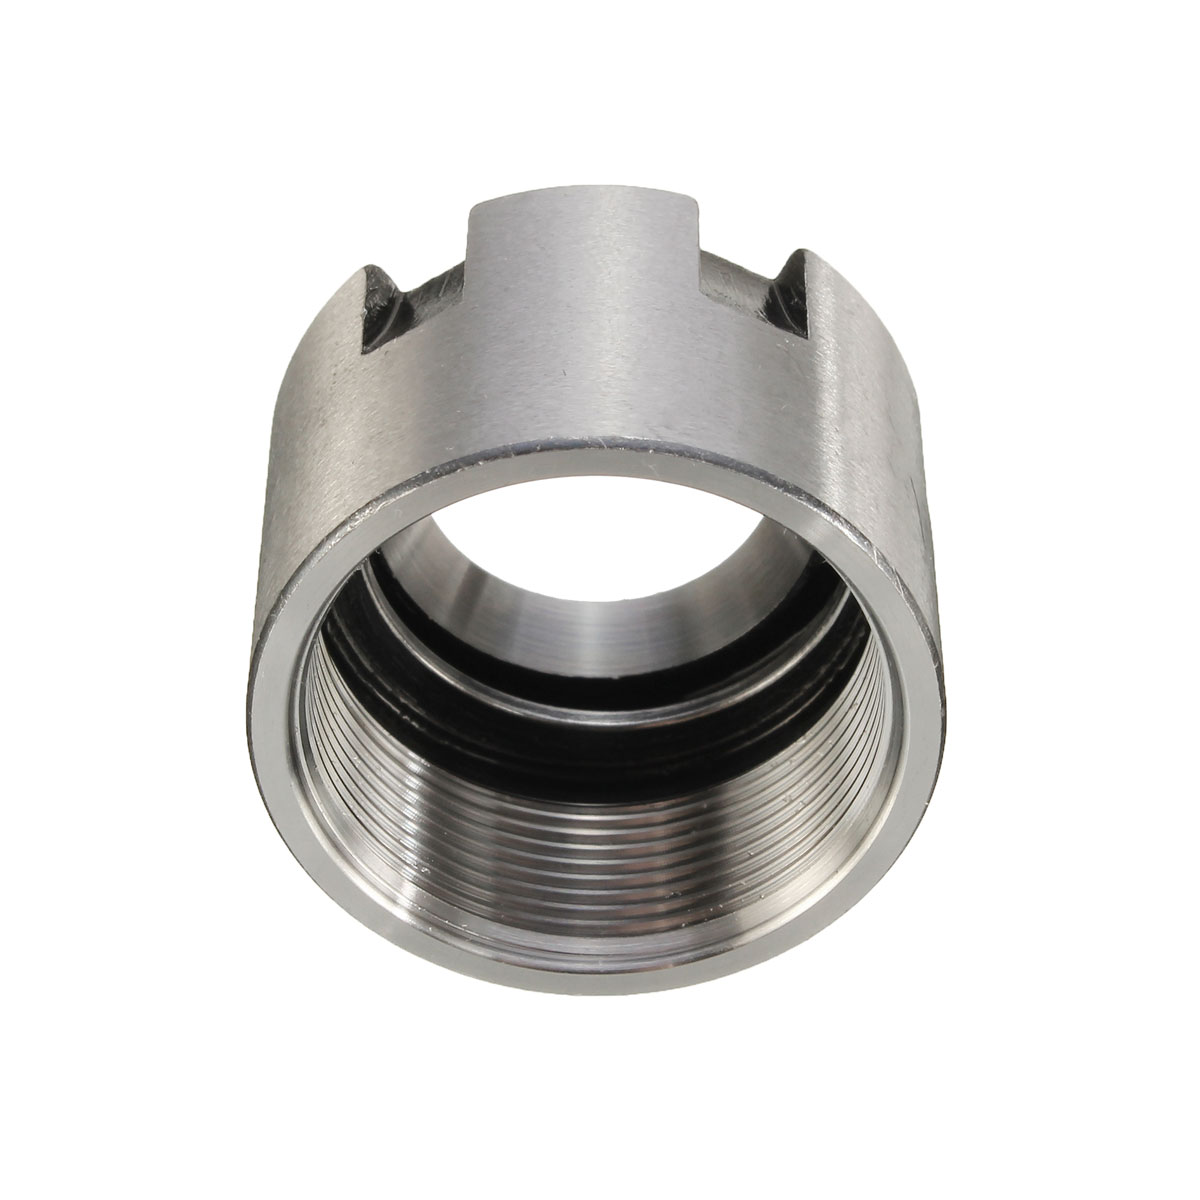 ER--A-M-Type-Nut-Collet-Clamping-Nut-for-CNC-Milling-Chuck-Holder-Lathe-Tool-1064956-7